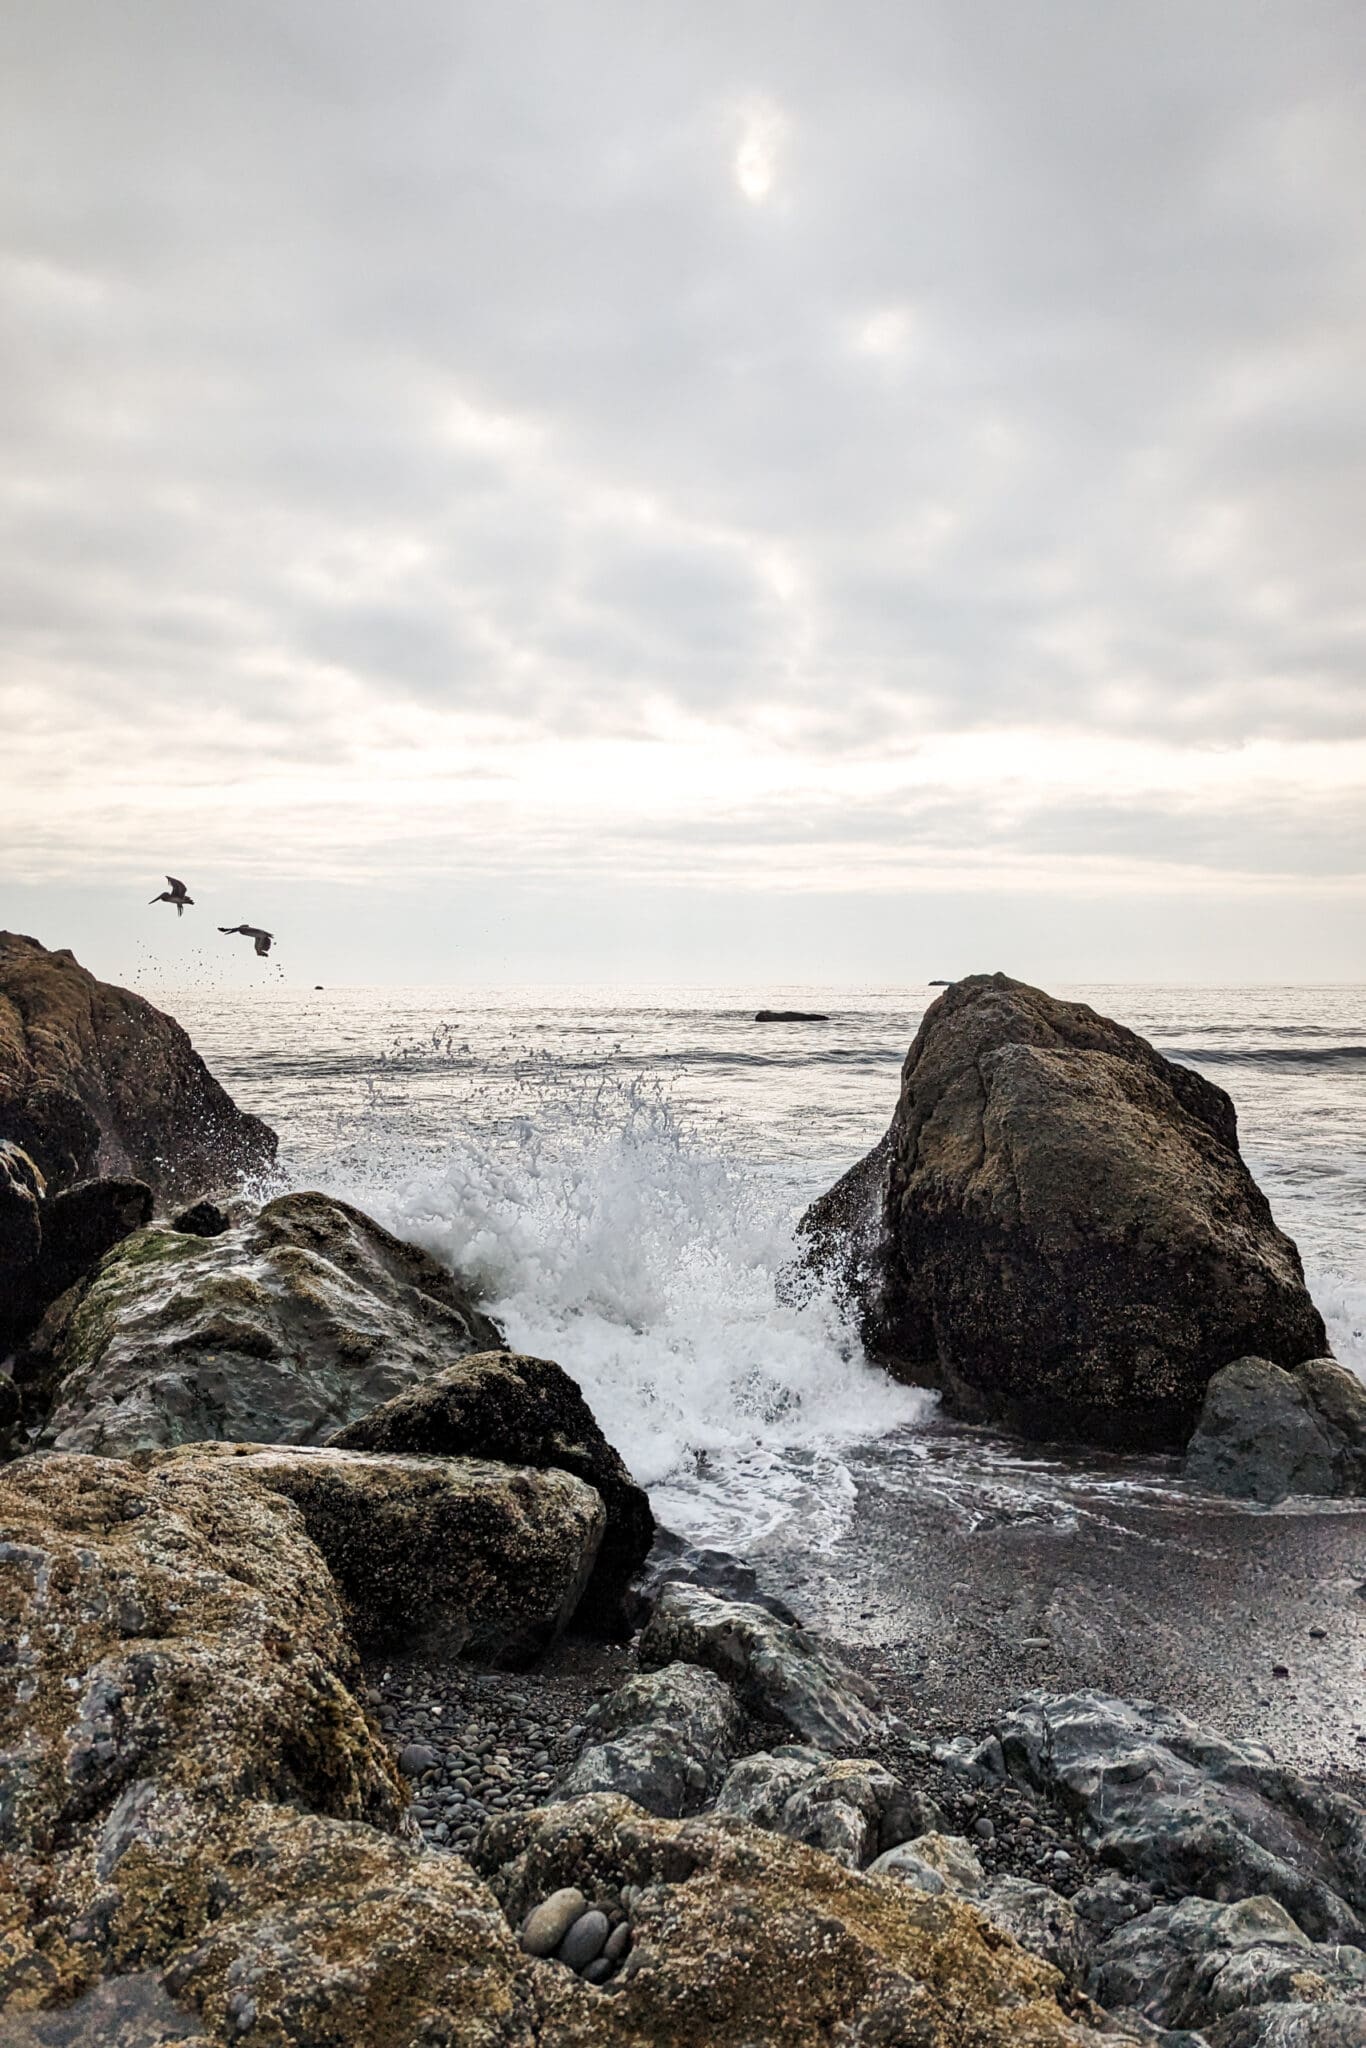 Waves crashing on rocks with pelicans flying